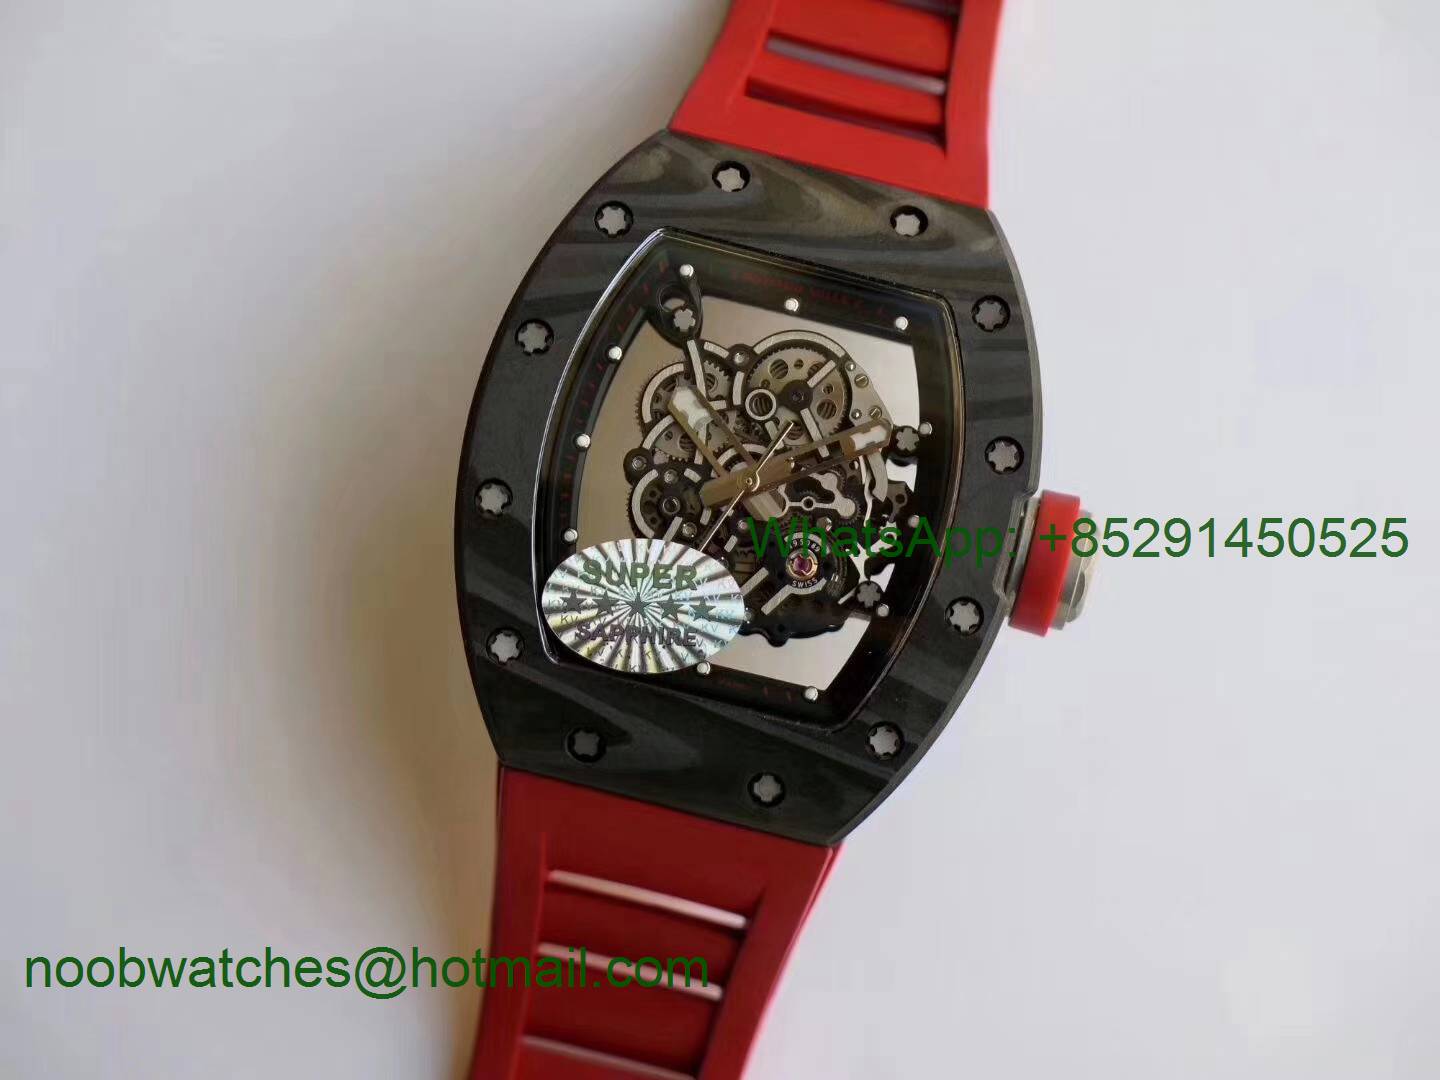 Replica Richard Mille RM055 Forge Carbon Titanium Case KVF Best Edition Skeleton Dial Red Rubber Strap MIYOTA8215